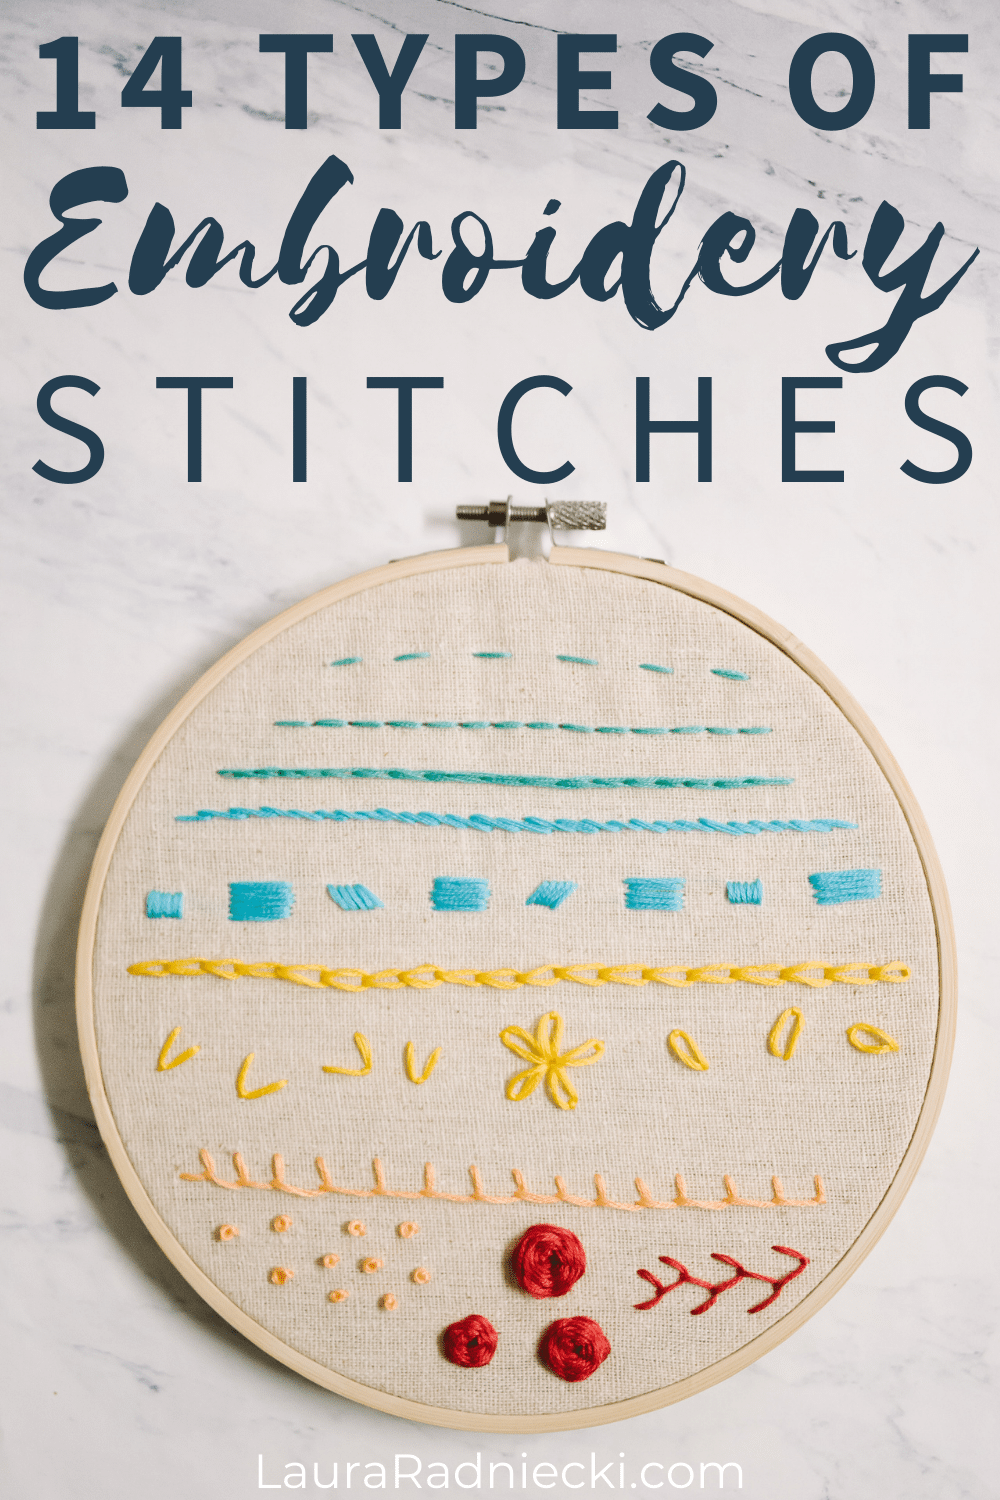 14 types of embroidery stitches to use